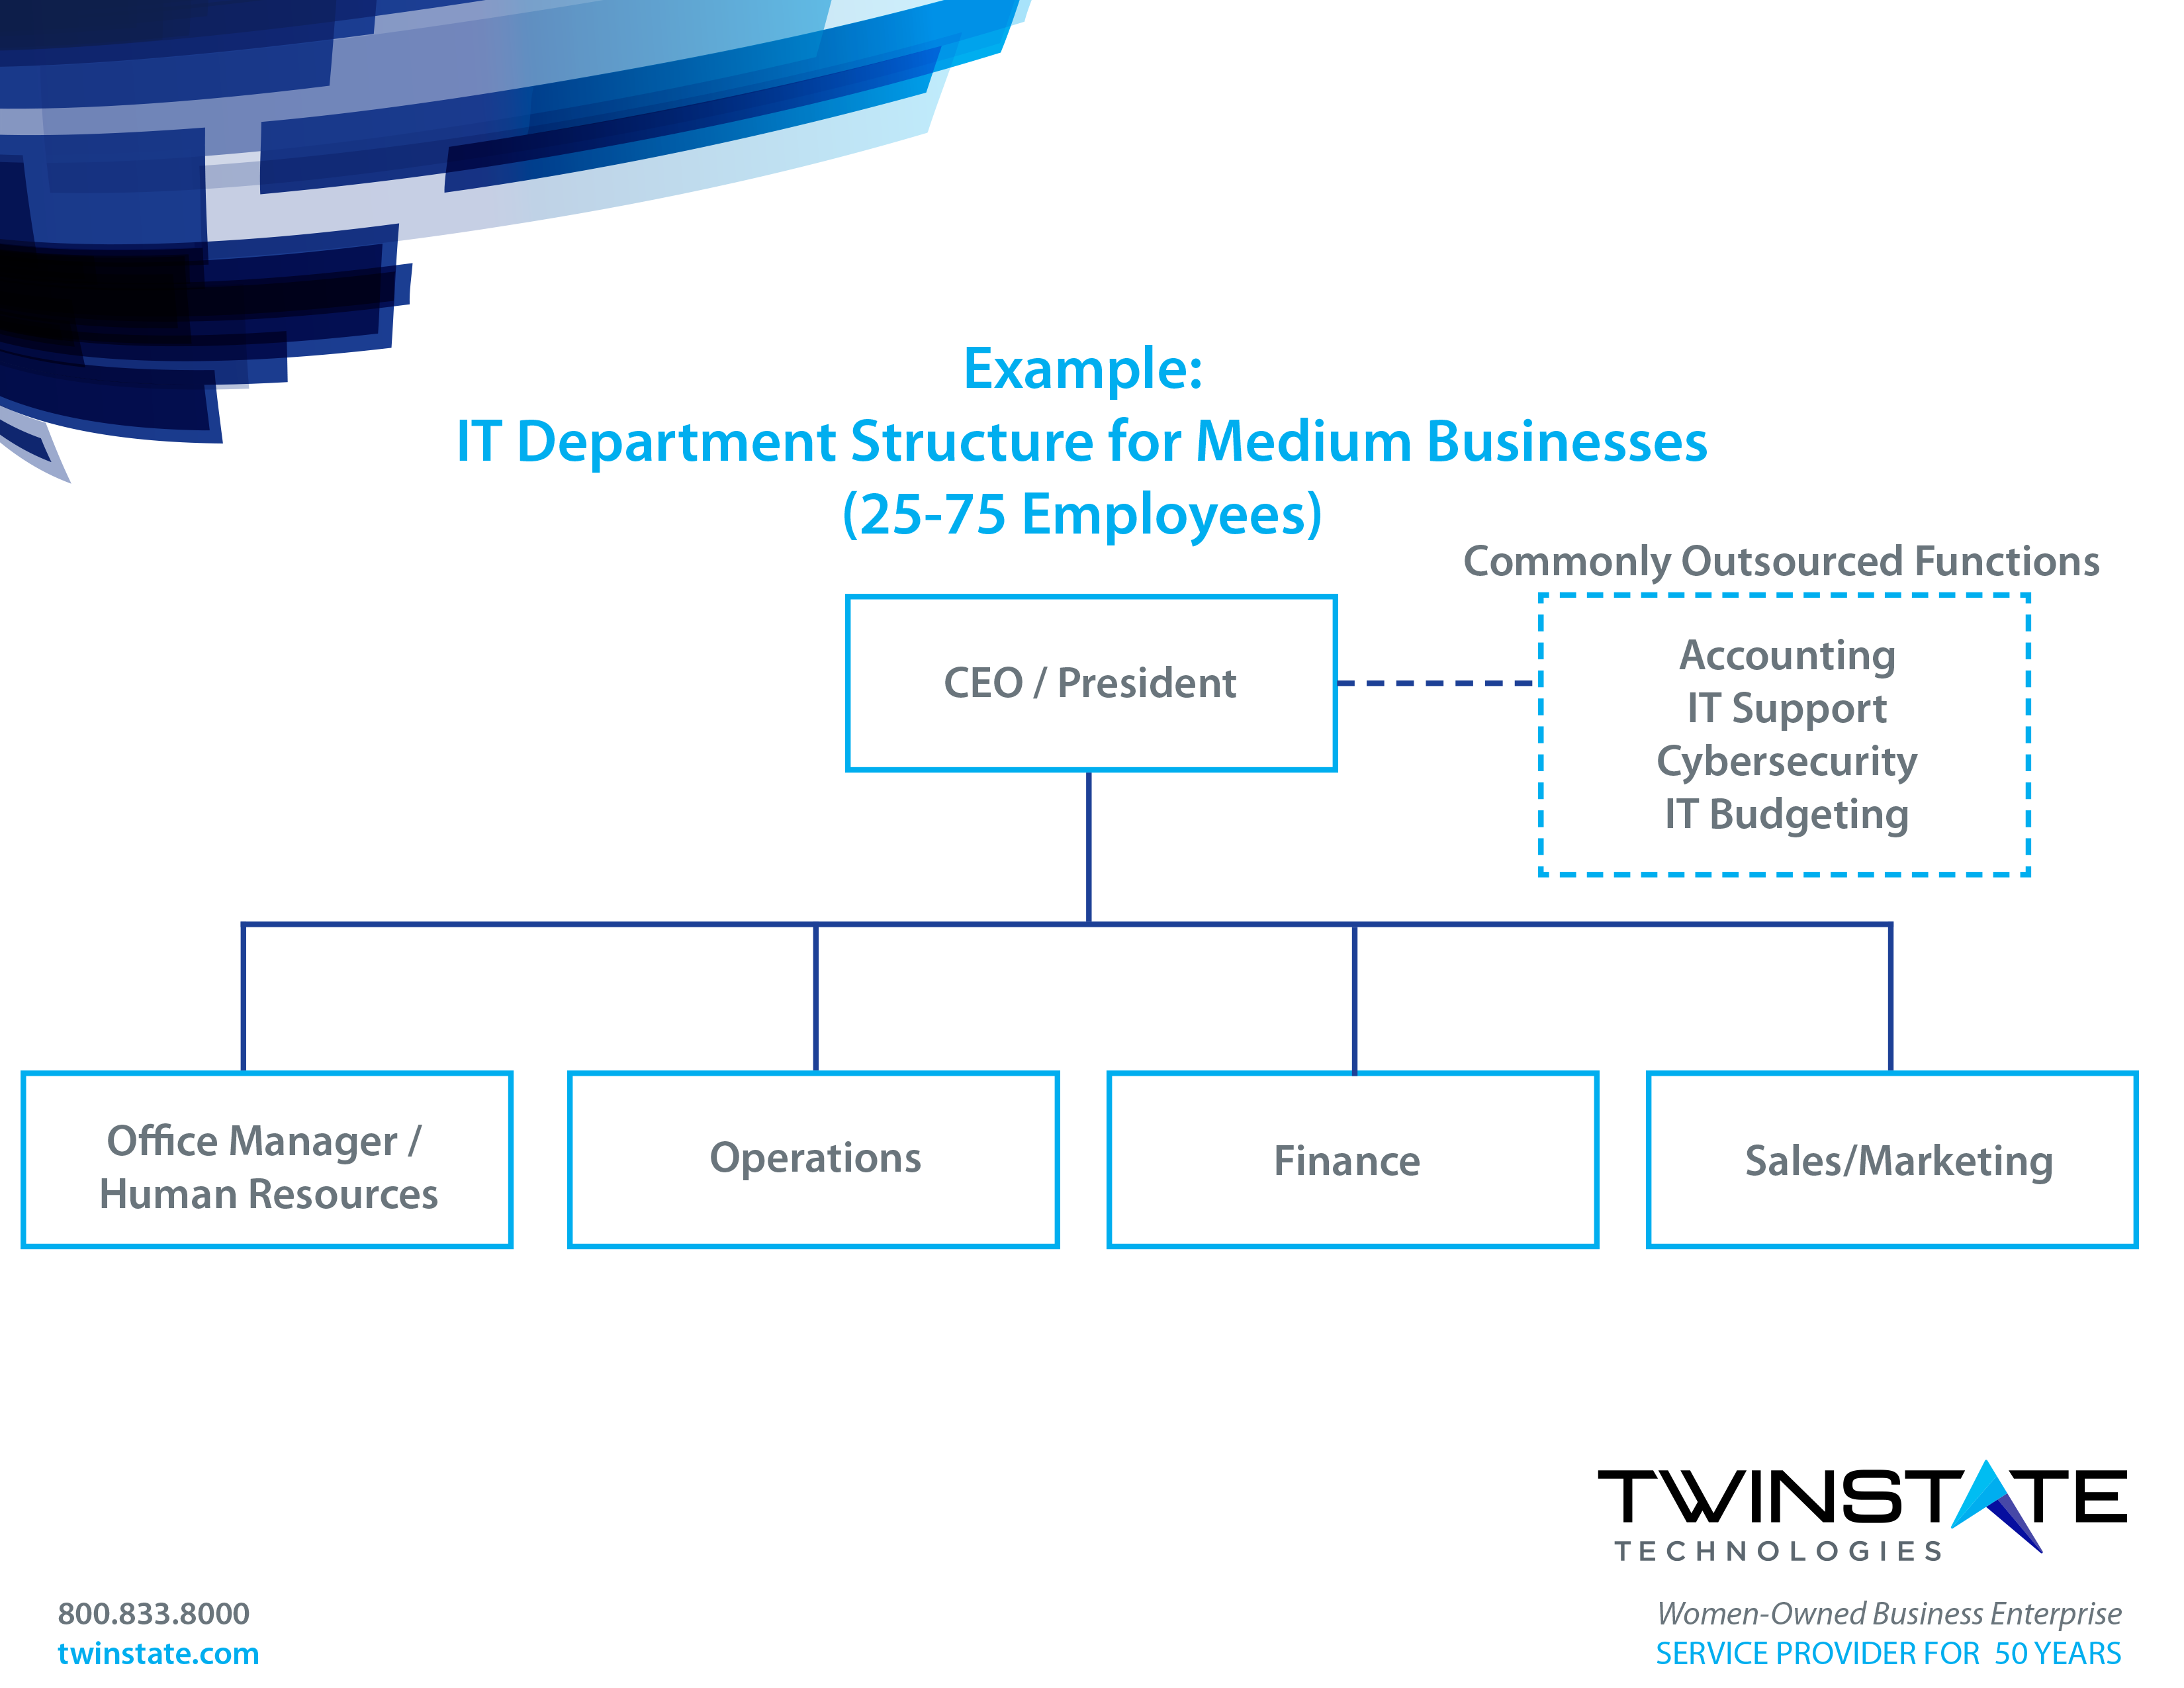 Example of a medium business' IT Department Structure 